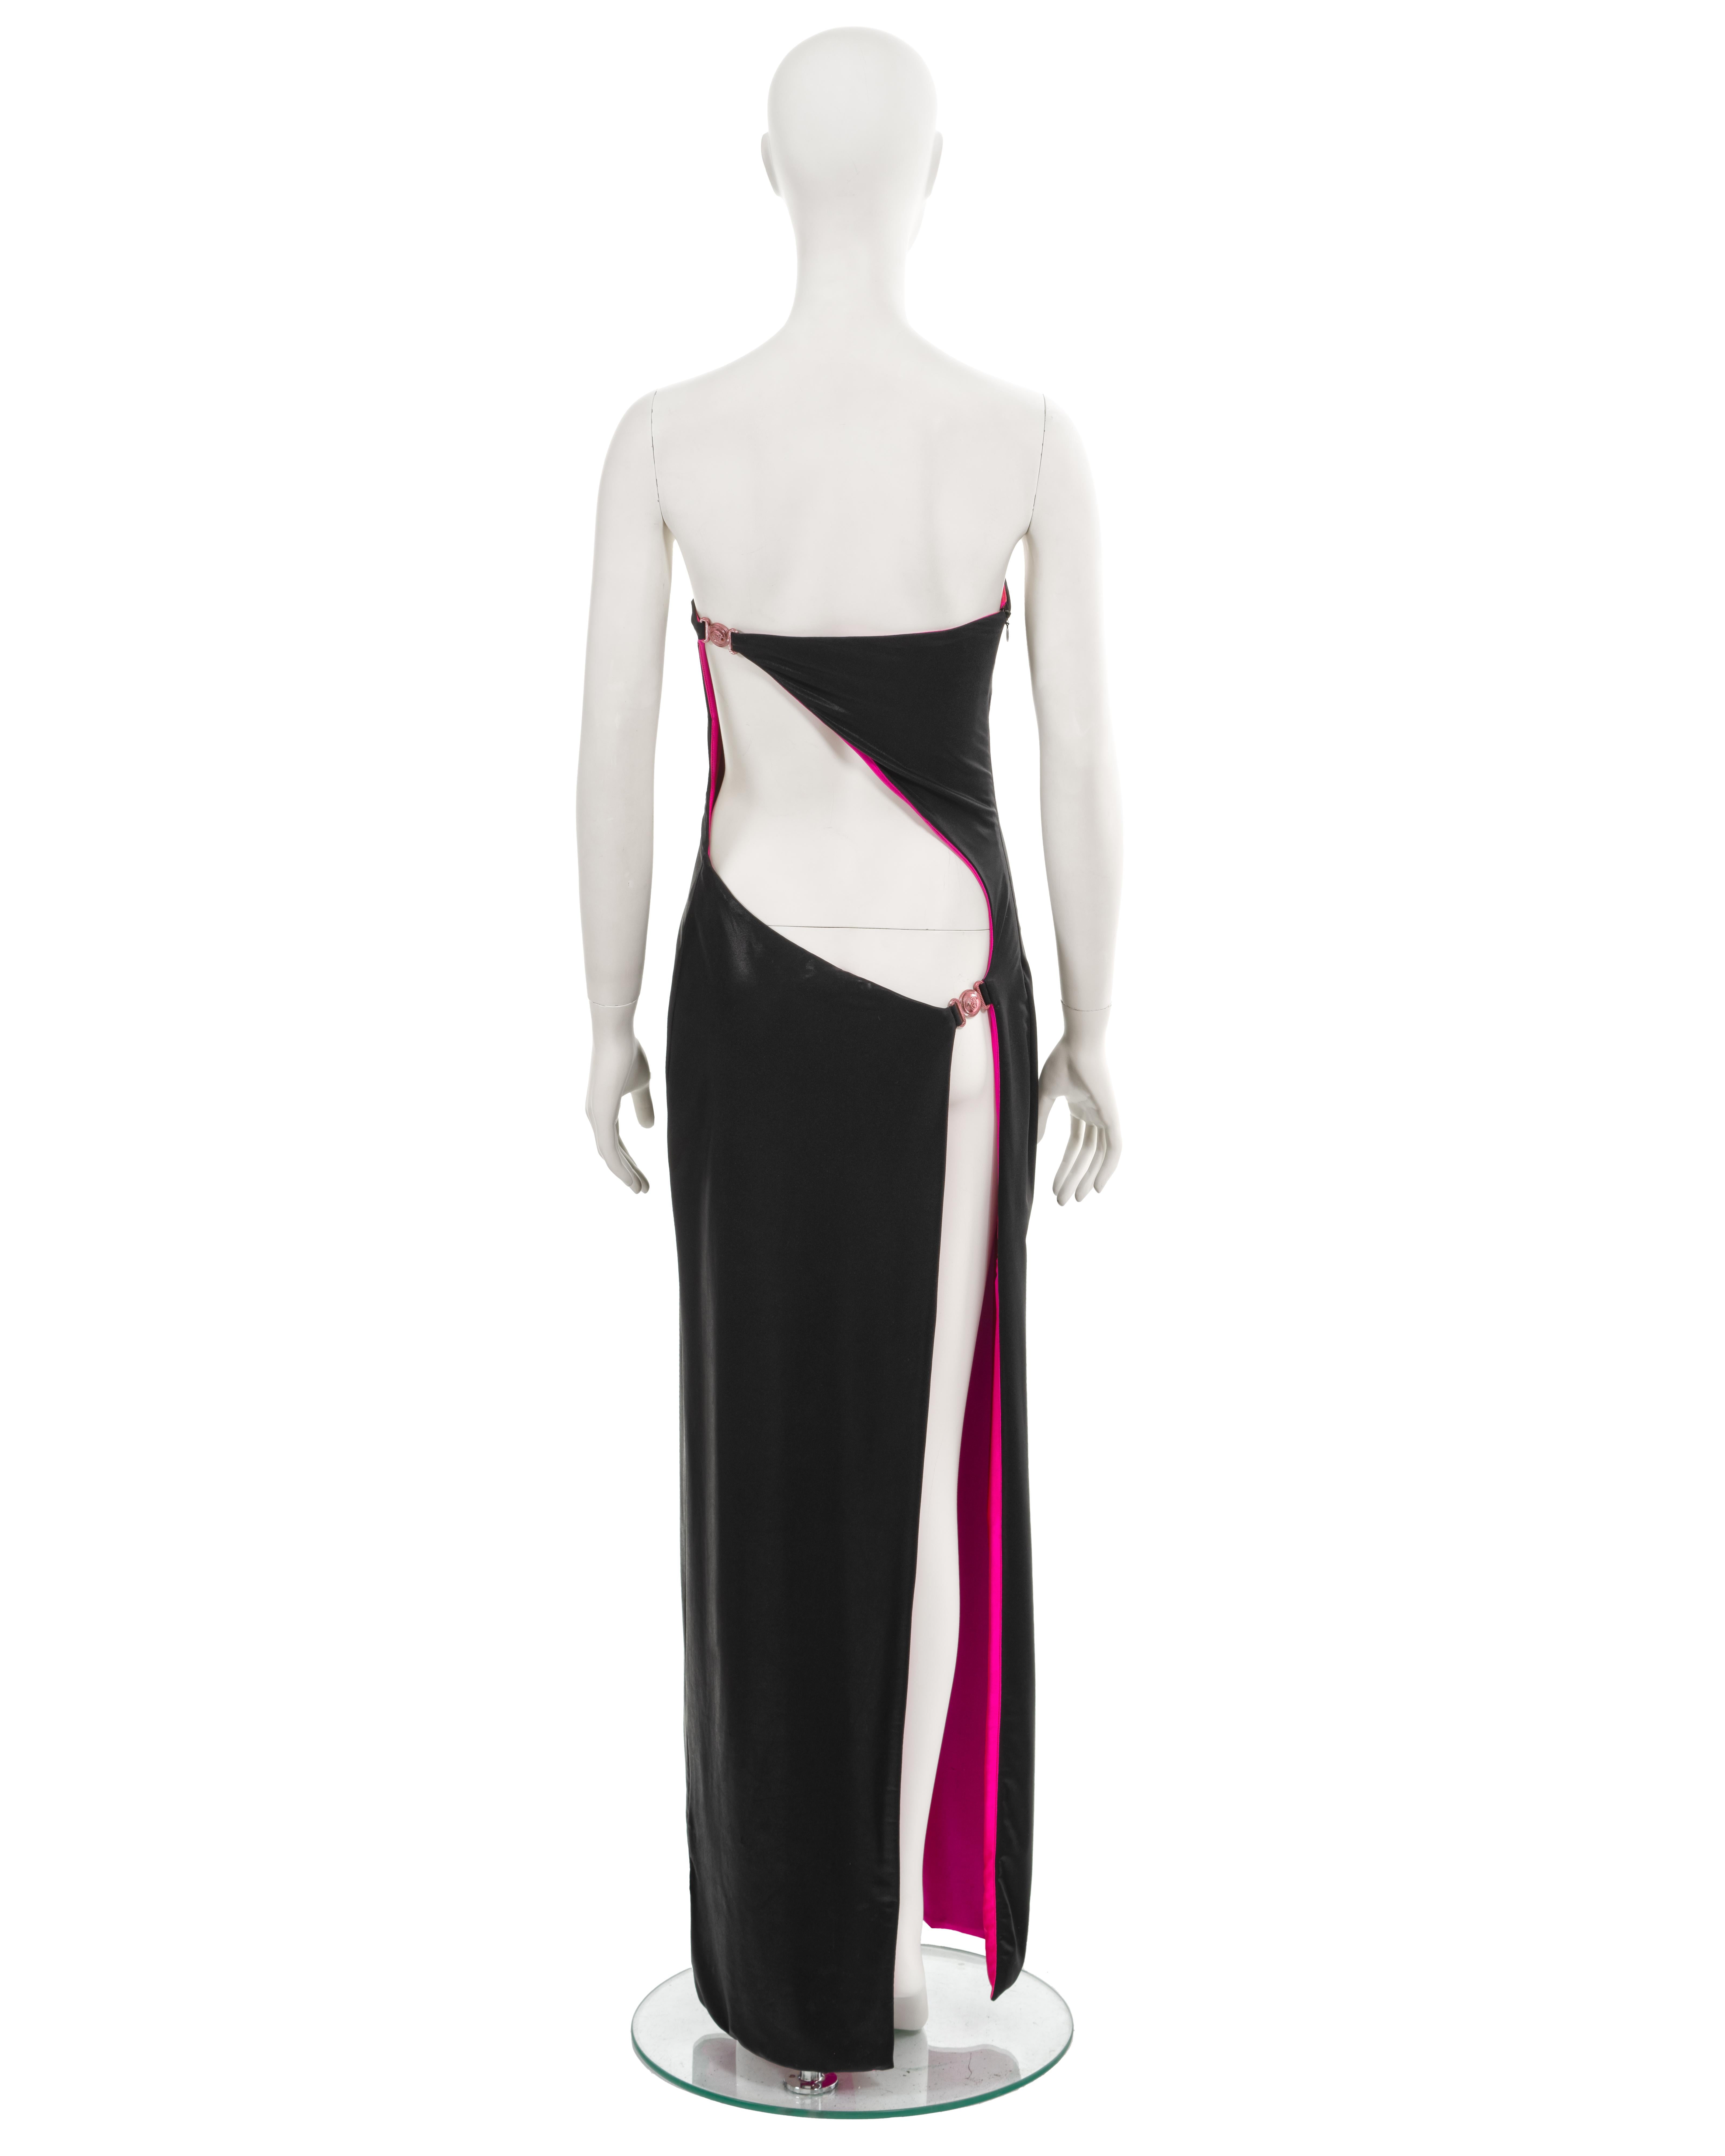 Archival Gianni Versace strapless evening dress crafted from black wet-look stretch jersey, complemented by a vibrant hot pink lining. This exquisite dress features a stylish cut-out back, adorned with rose-gold Medusa hardware, and showcases a